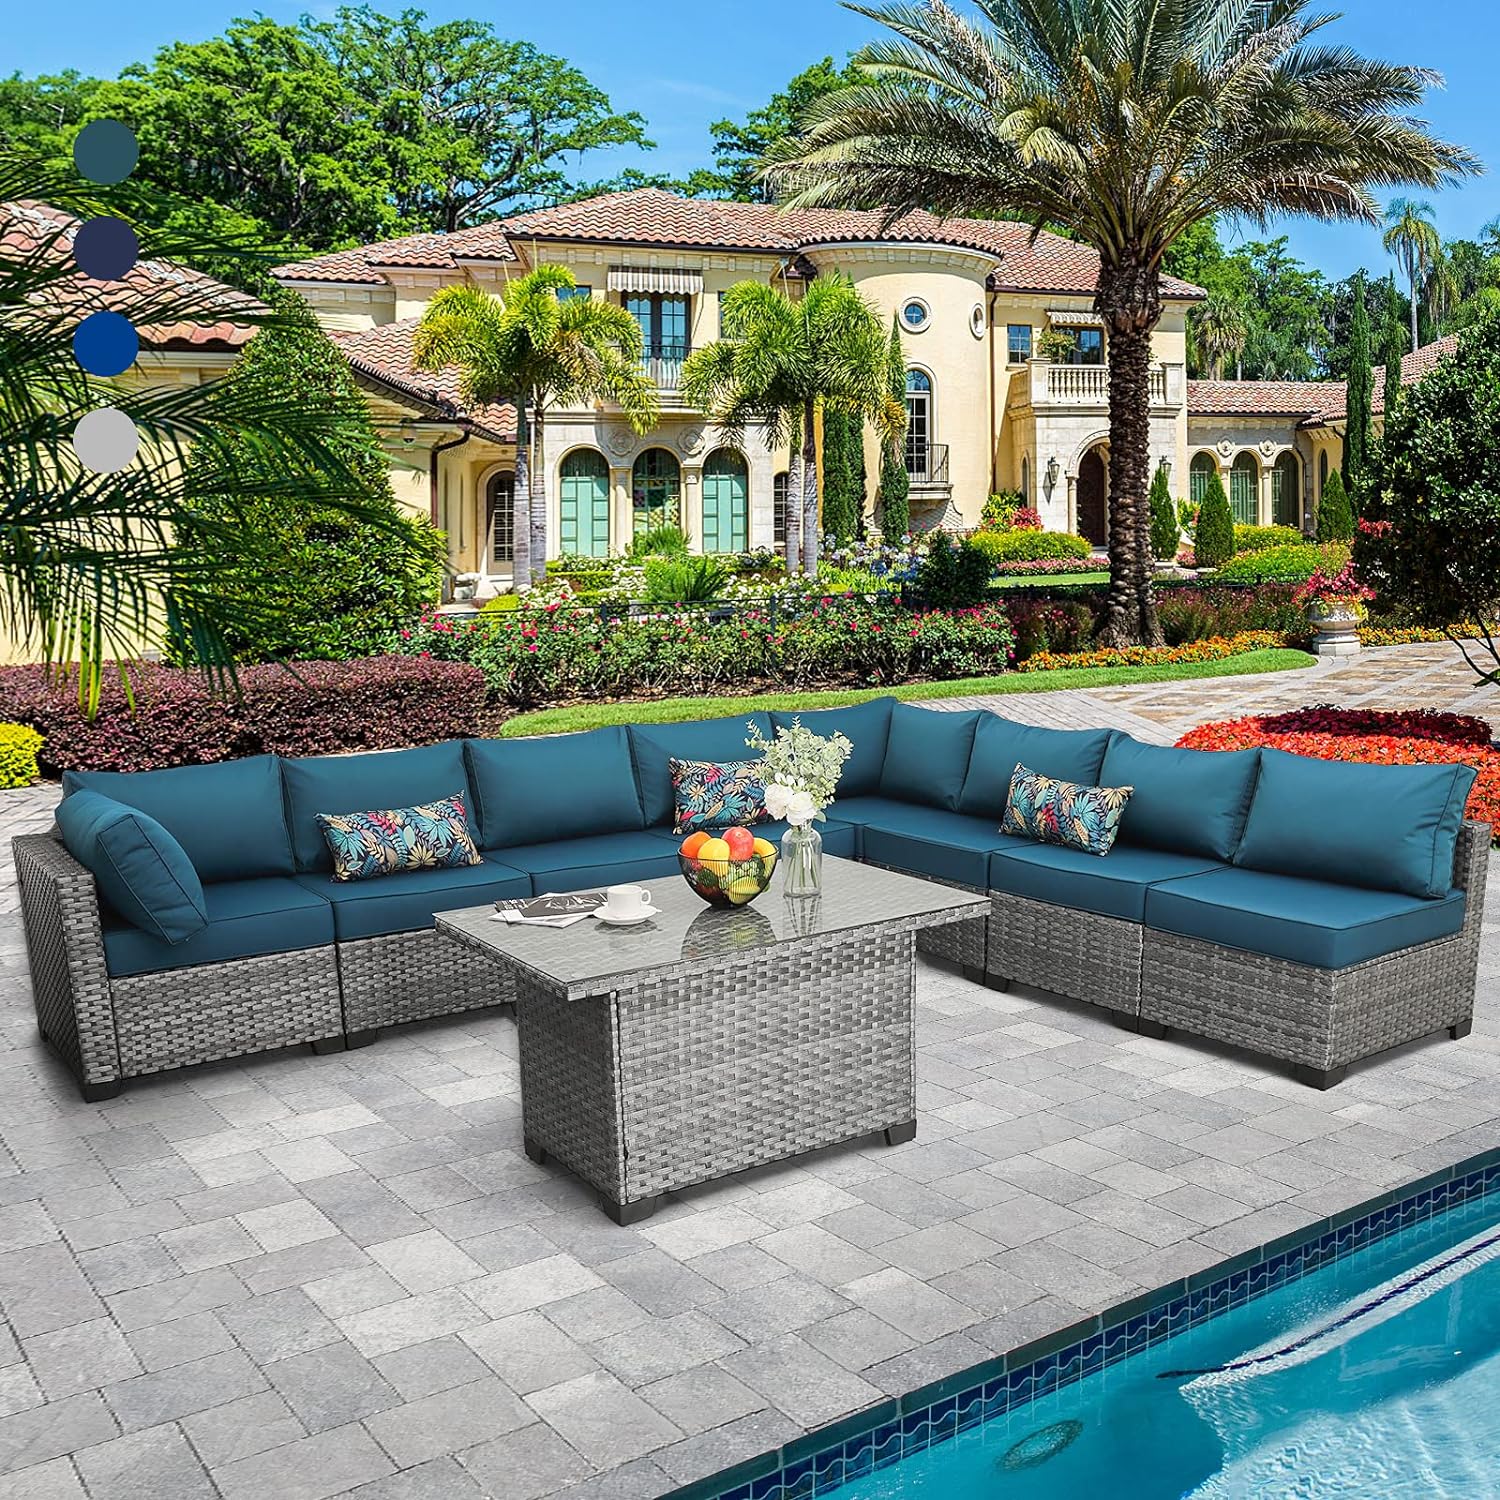 Rattaner Patio Furniture Sectional Sofa Set 9 Pieces Outdoor Wicker Furniture Couch Storage Glass Table with Thicken(5) Anti-Slip Peacock Blue Cushions Furniture Cover